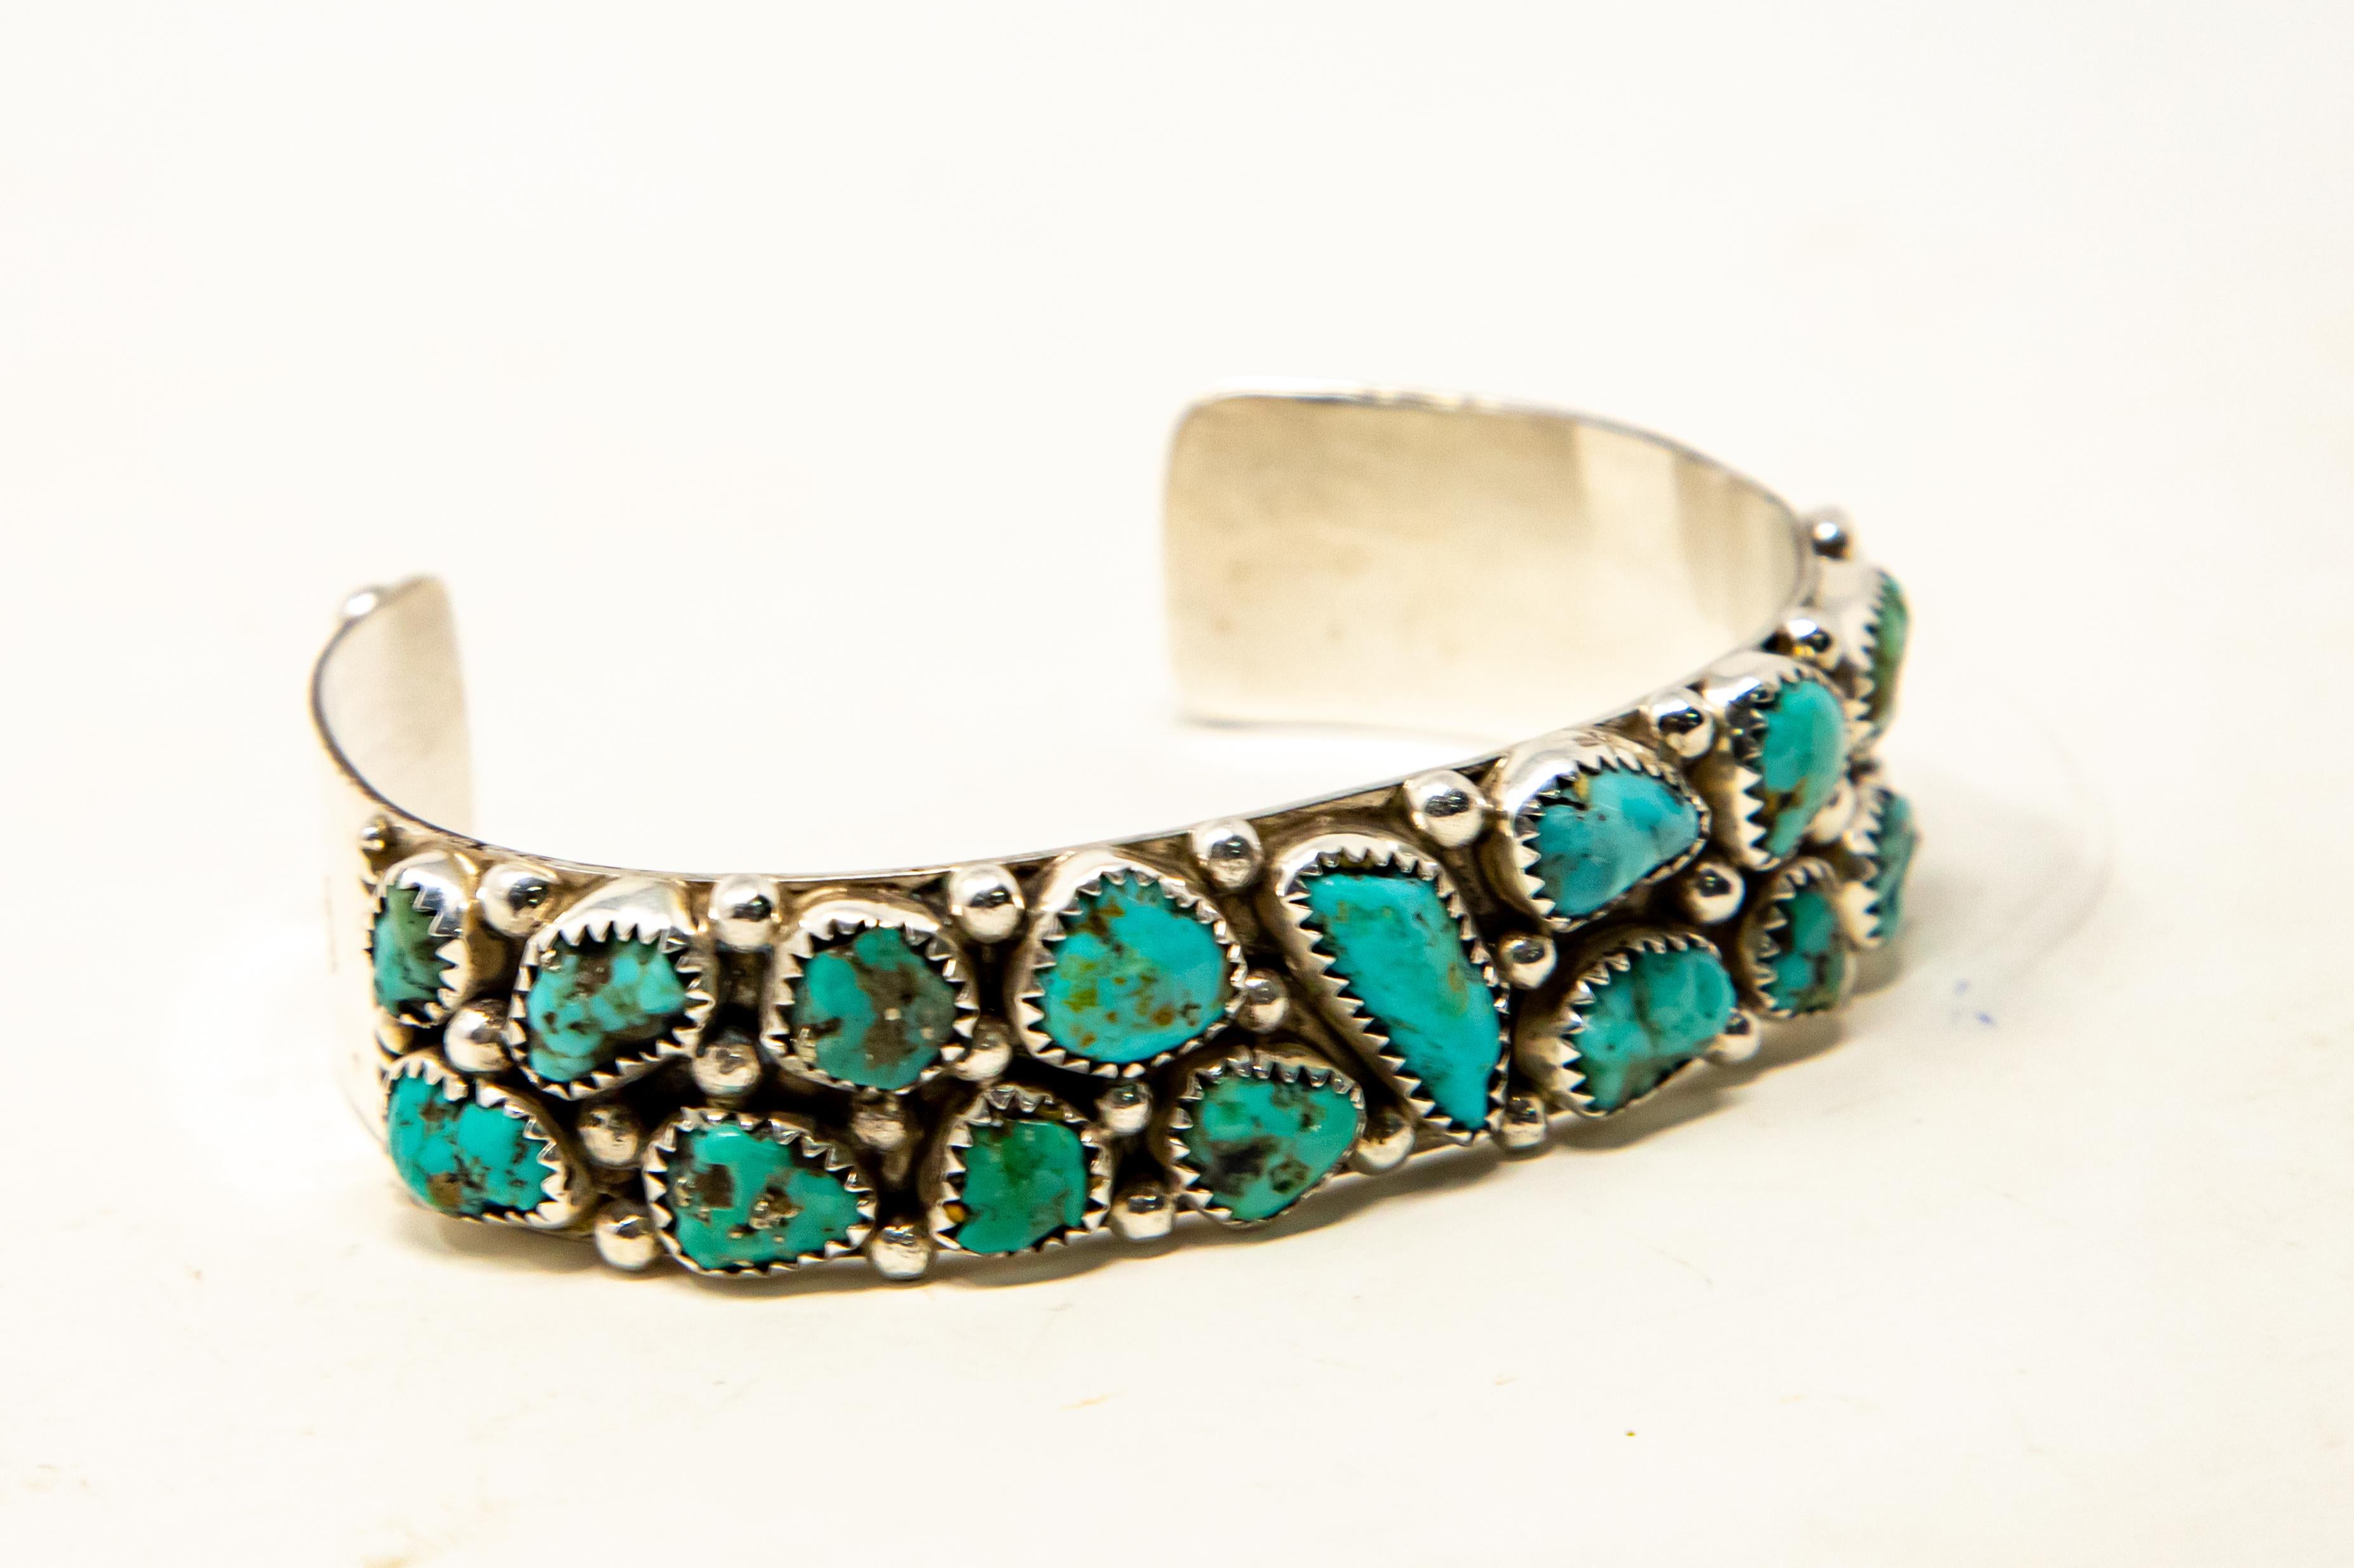 Offering this stunning sterling silver and turquoise cuff. Having seventeen stones set in sterling silver this one is a dazzler. On each end of the cuff is three balls, then going into the middle there is scrollwork and balls around all the